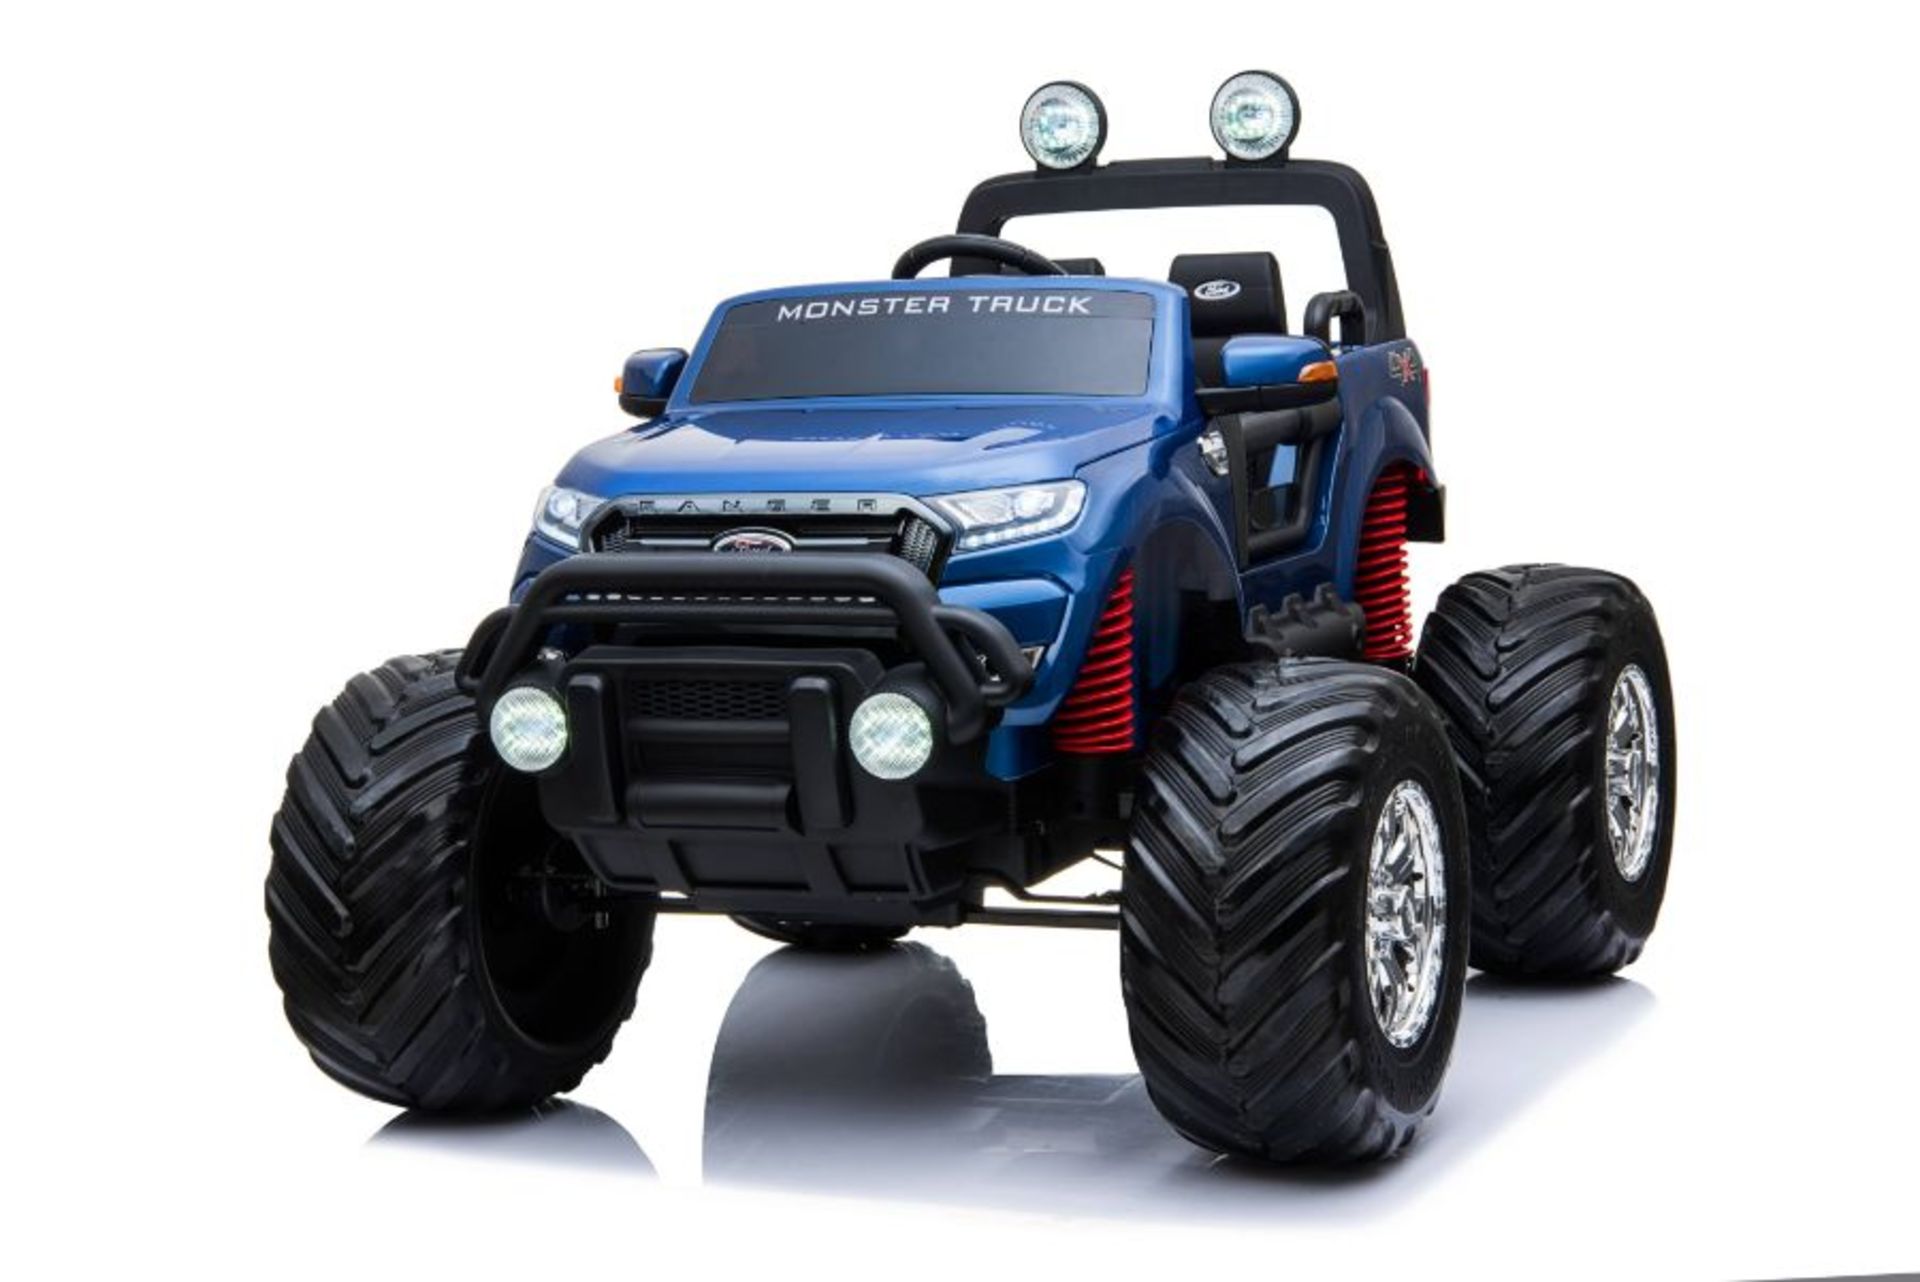 Ride On Fully Licenced Ford Ranger Monster Truck 12v with Parental Remote Control - Blue